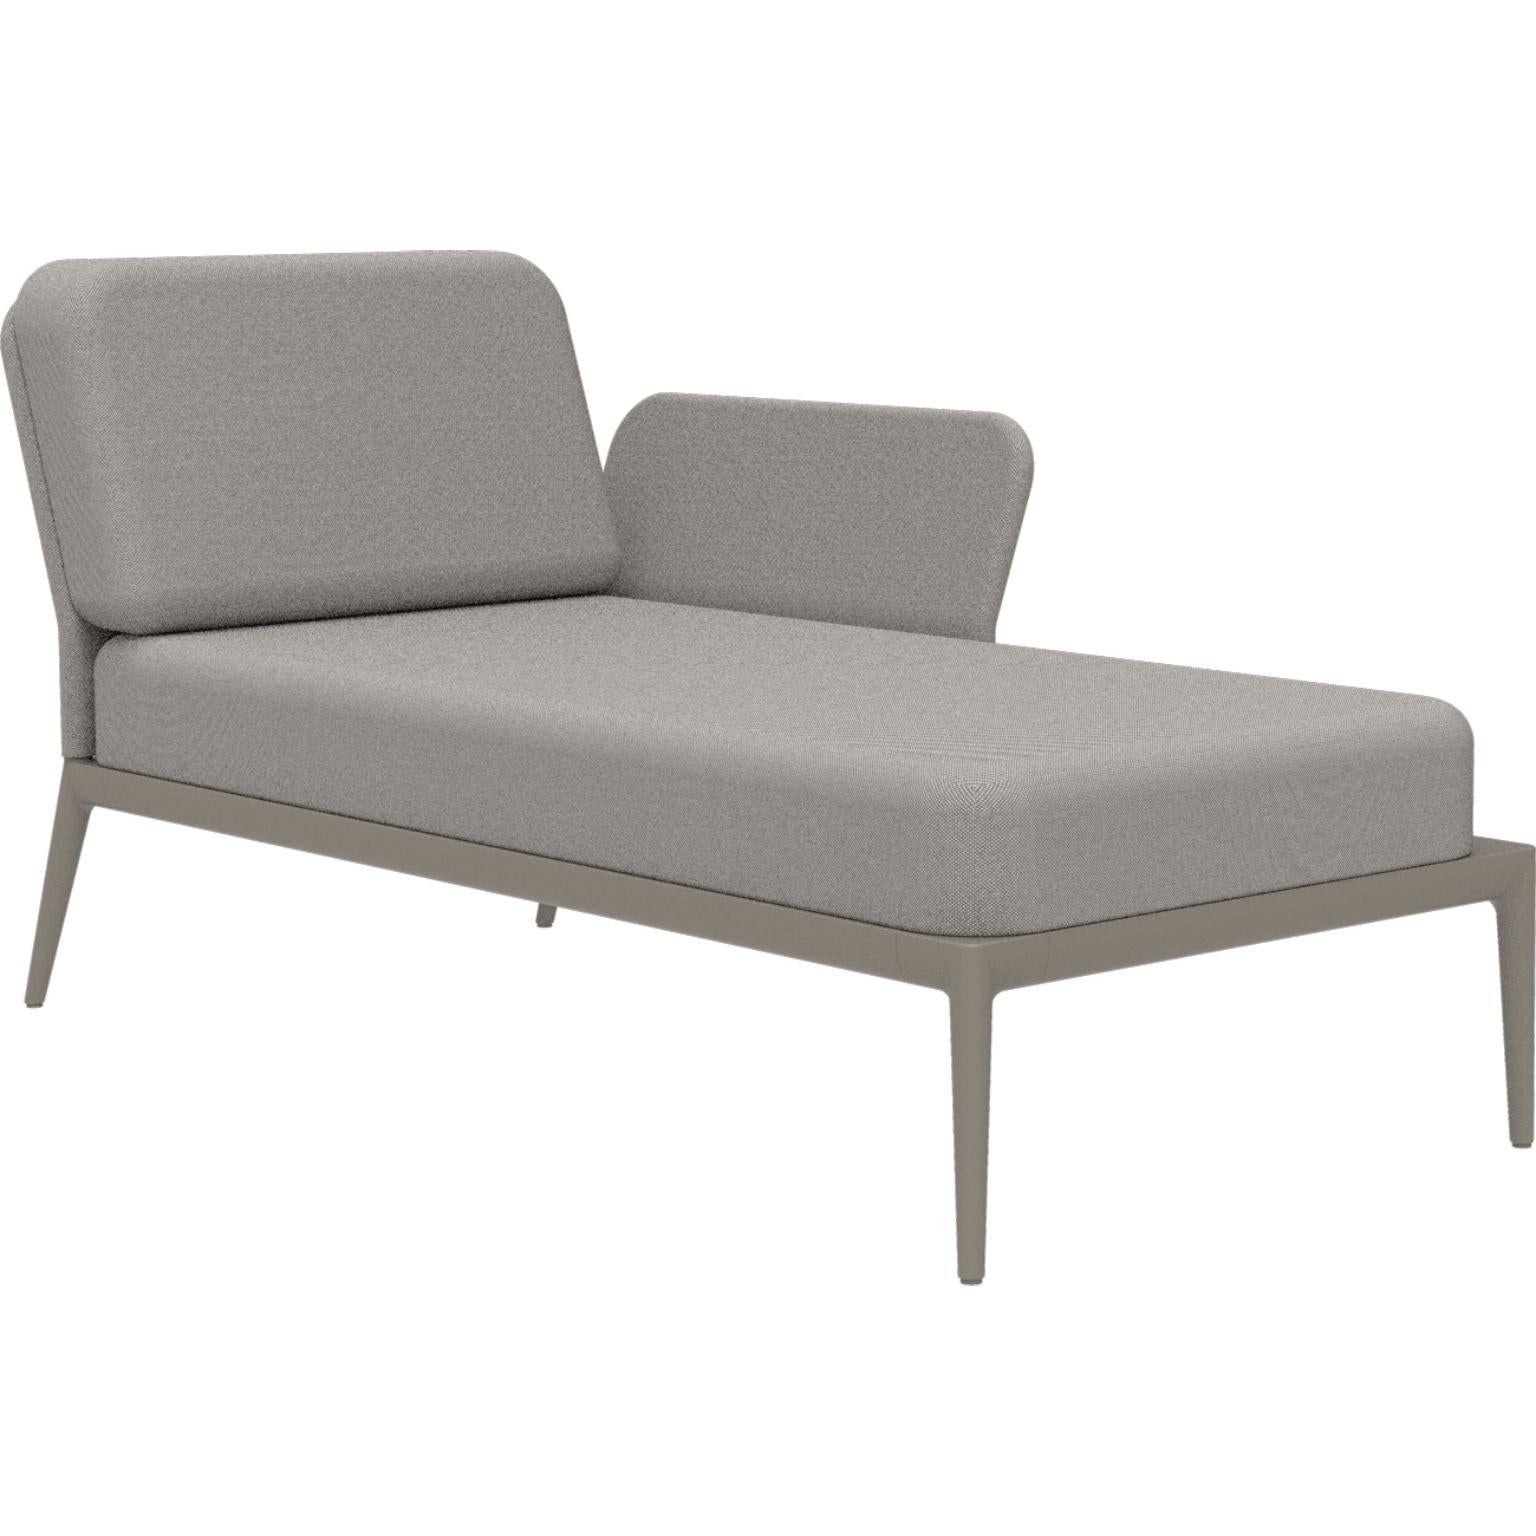 Cover Cream Left Chaise Longue by MOWEE
Dimensions: D80 x W155 x H81 cm (seat height 42 cm).
Material: Aluminum and upholstery.
Weight: 28 kg.
Also available in different colors and finishes. Please contact us.

An unmistakable collection for